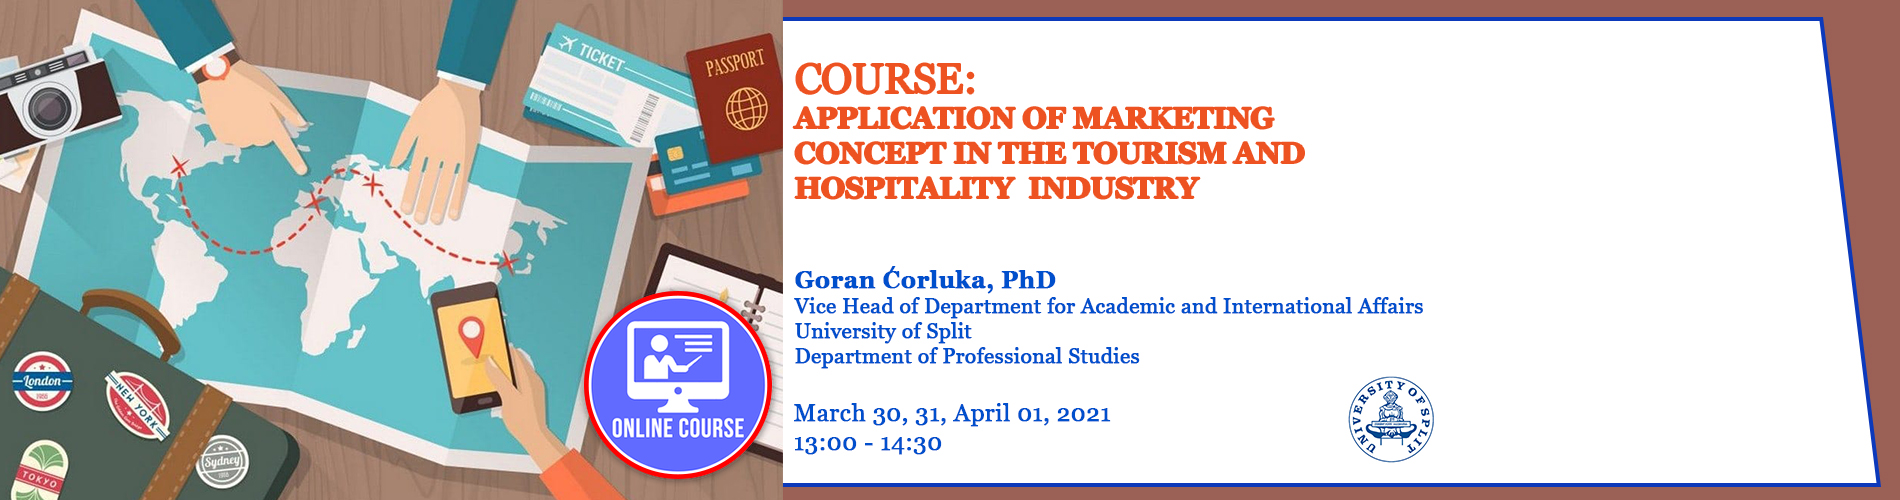 2021.03.30-2021.04.01 Application of marketing concept in the tourism